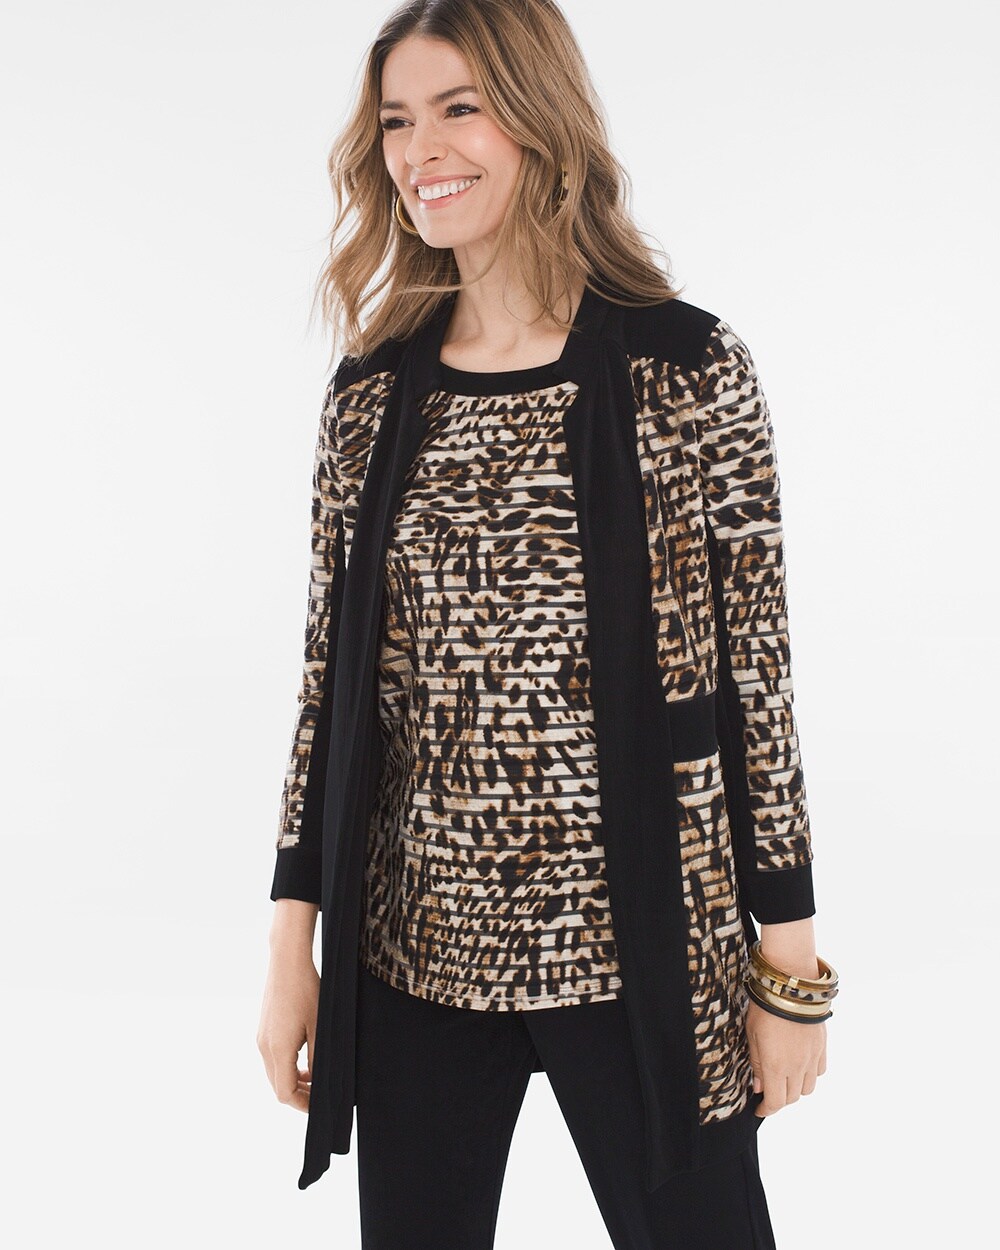 Travelers Collection Leopard-Print Jacket